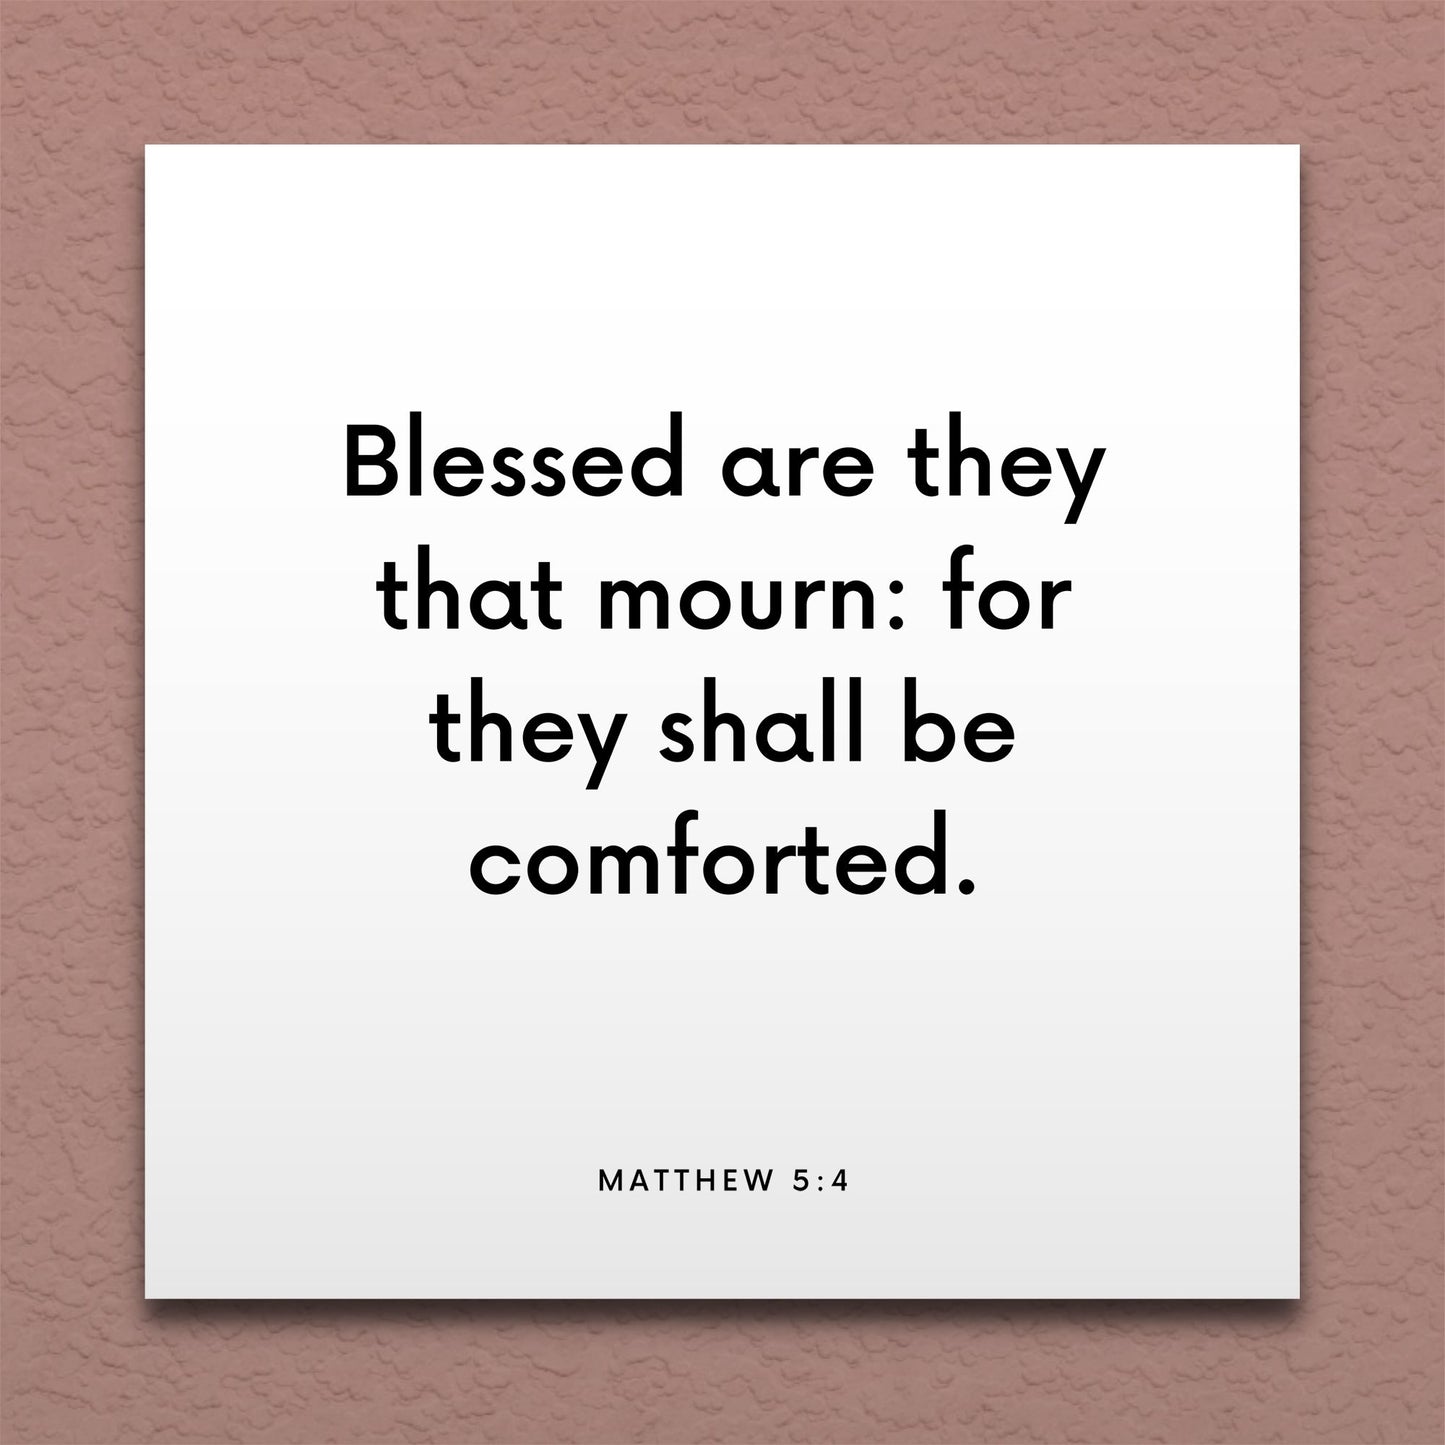 Wall-mounted scripture tile for Matthew 5:4 - "Blessed are they that mourn: for they shall be comforted"